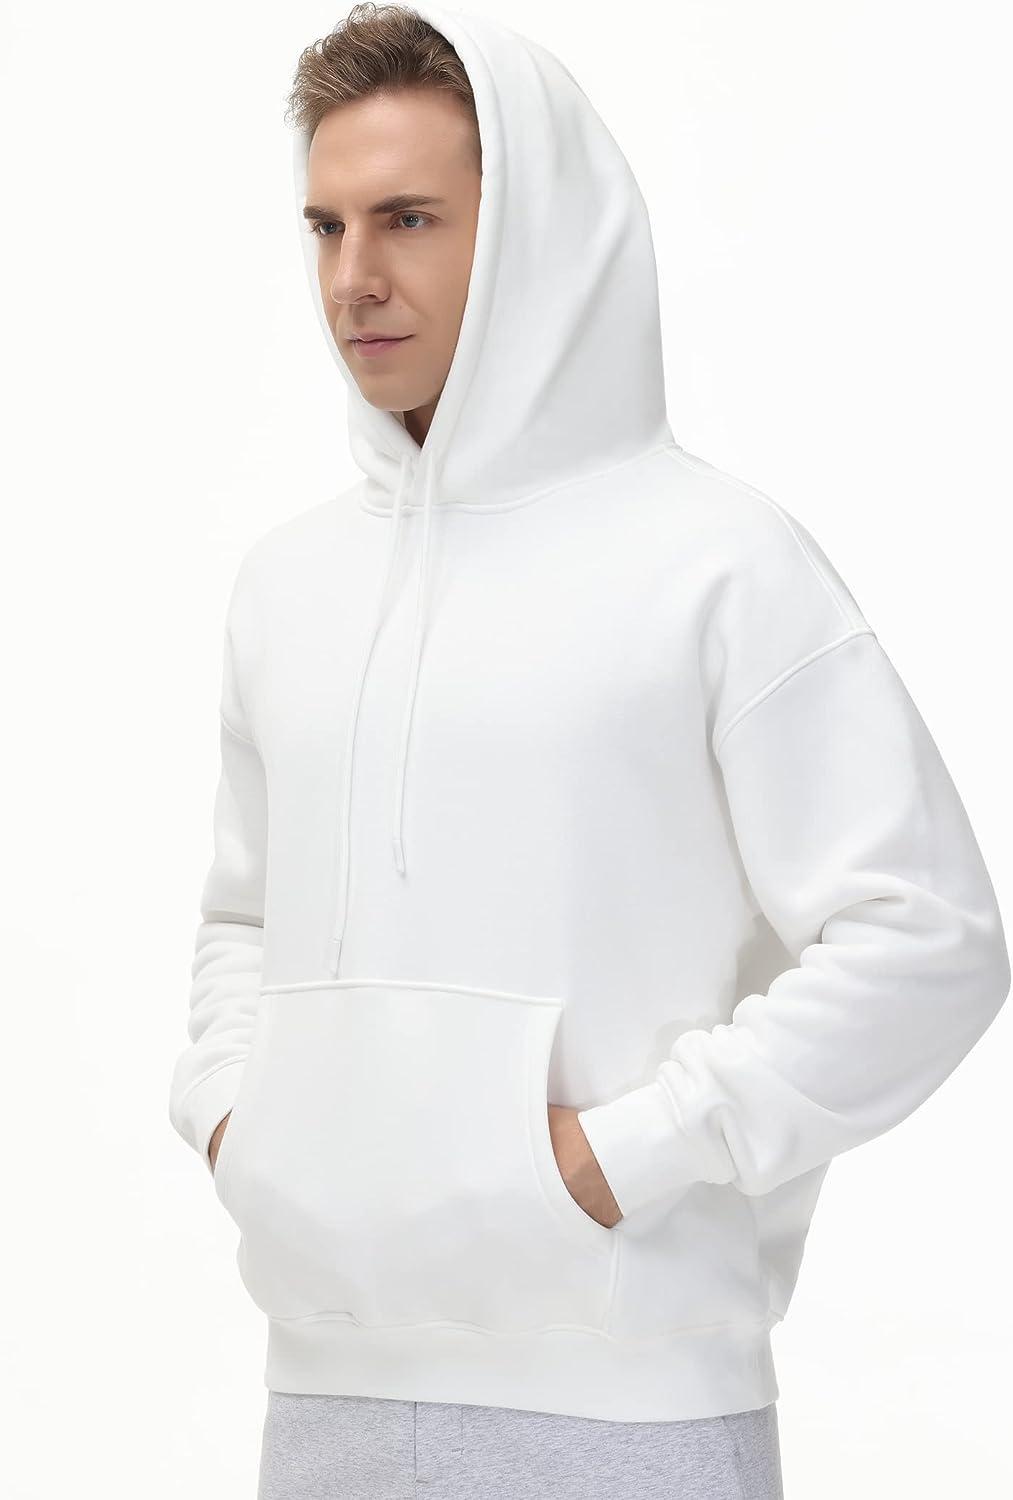 THE GYM PEOPLE Men's Fleece Pullover Hoodie Loose Fit Ultra Soft Hooded  Sweatshirt With Pockets White Large